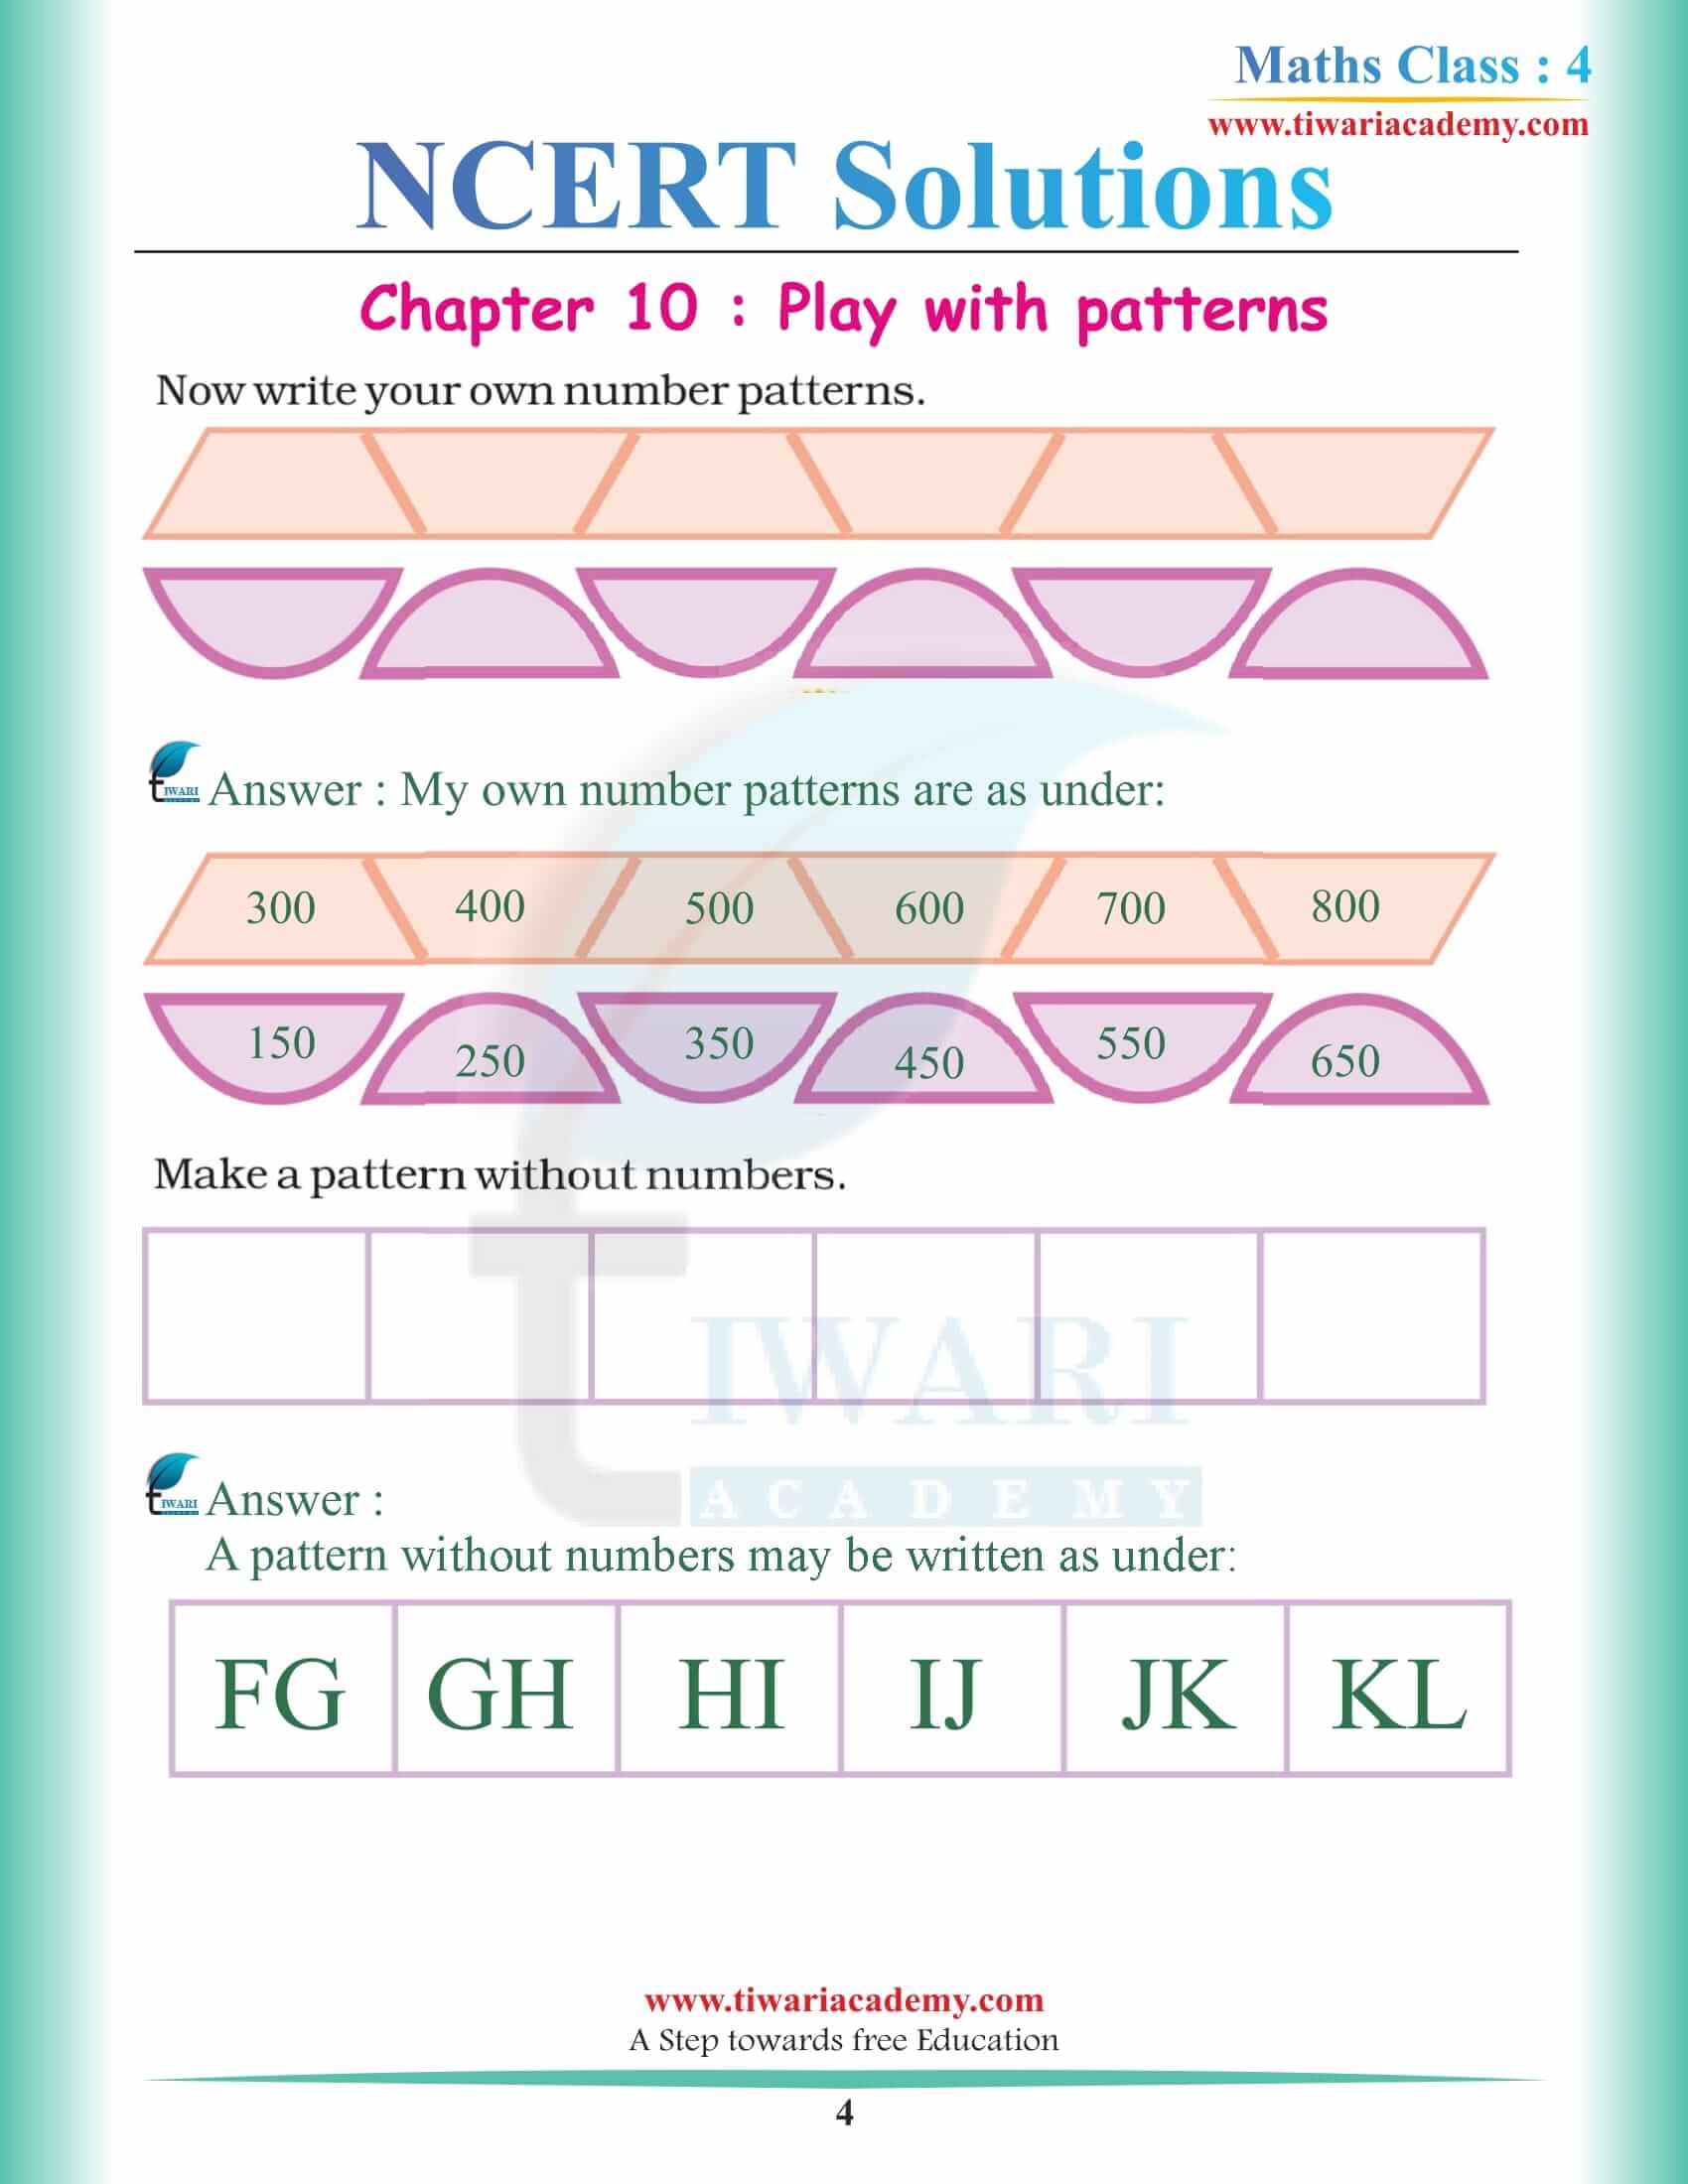 NCERT Solutions for Class 4 Maths Chapter 10 in PDF